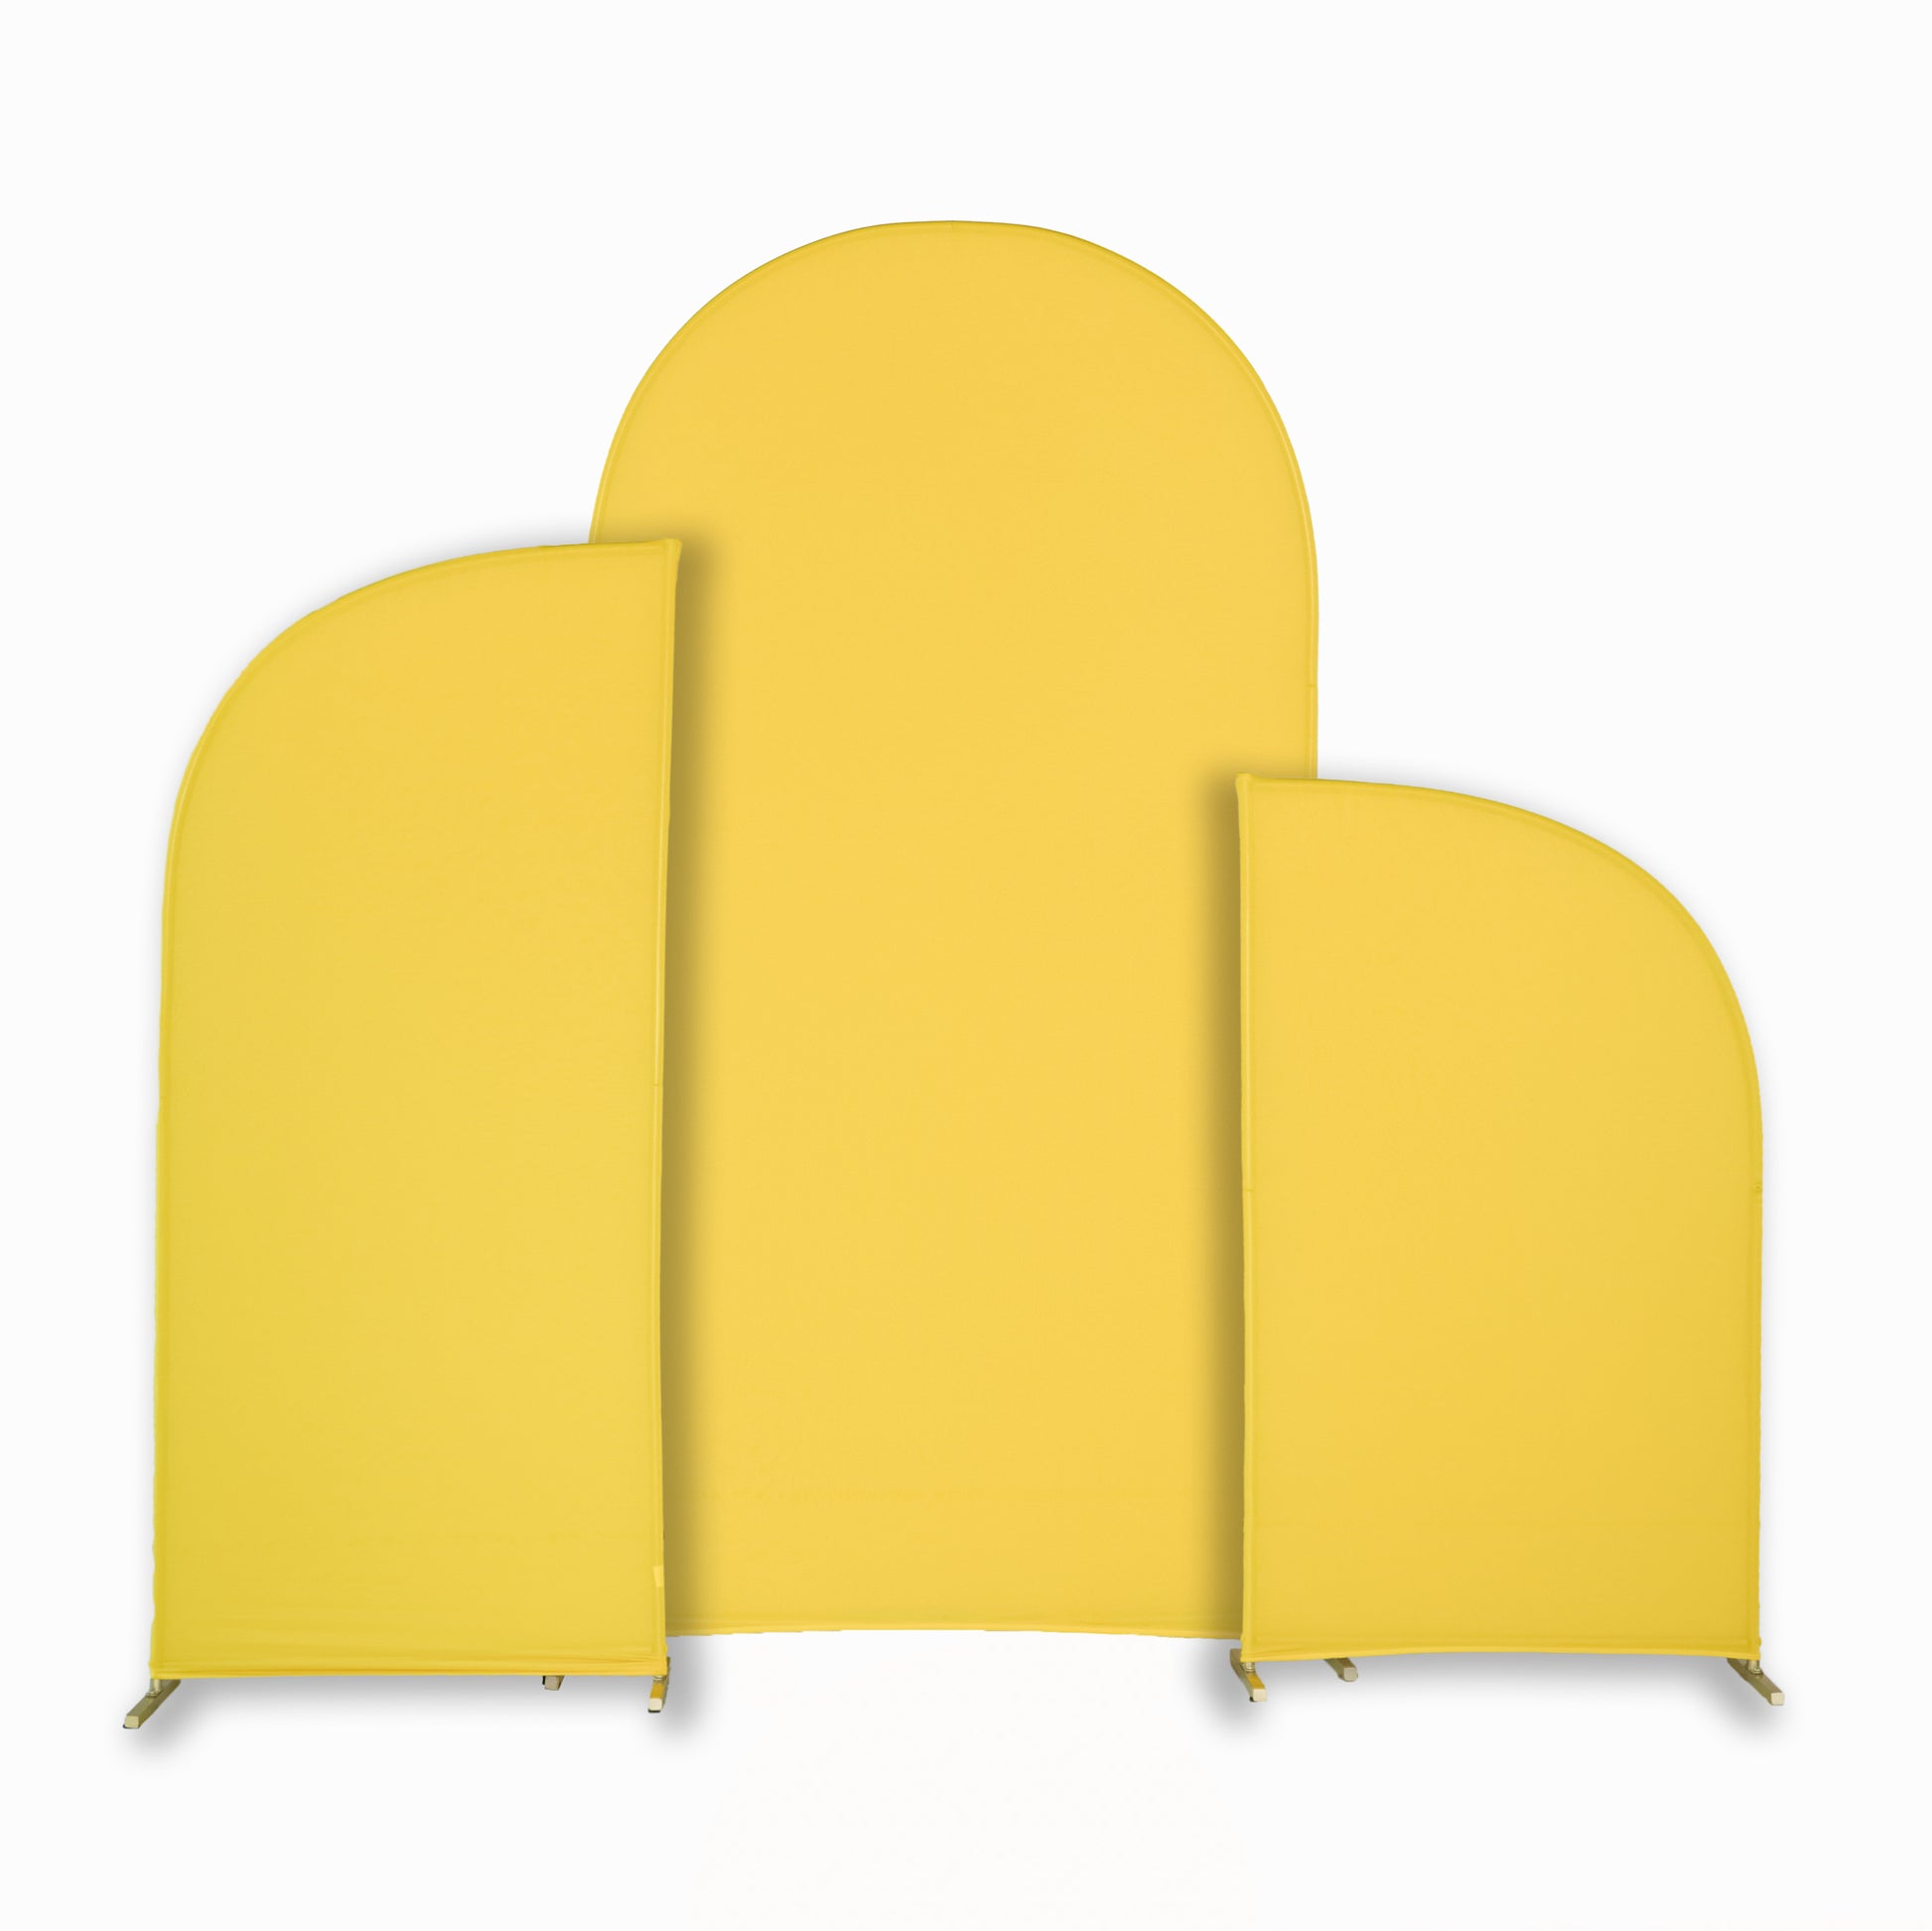 Spandex Arch Covers for Chiara Frame Backdrop 3pc/set - Canary YellowSpandex Arch Covers for Chiara Frame Backdrop 3pc/set - Canary Yellow